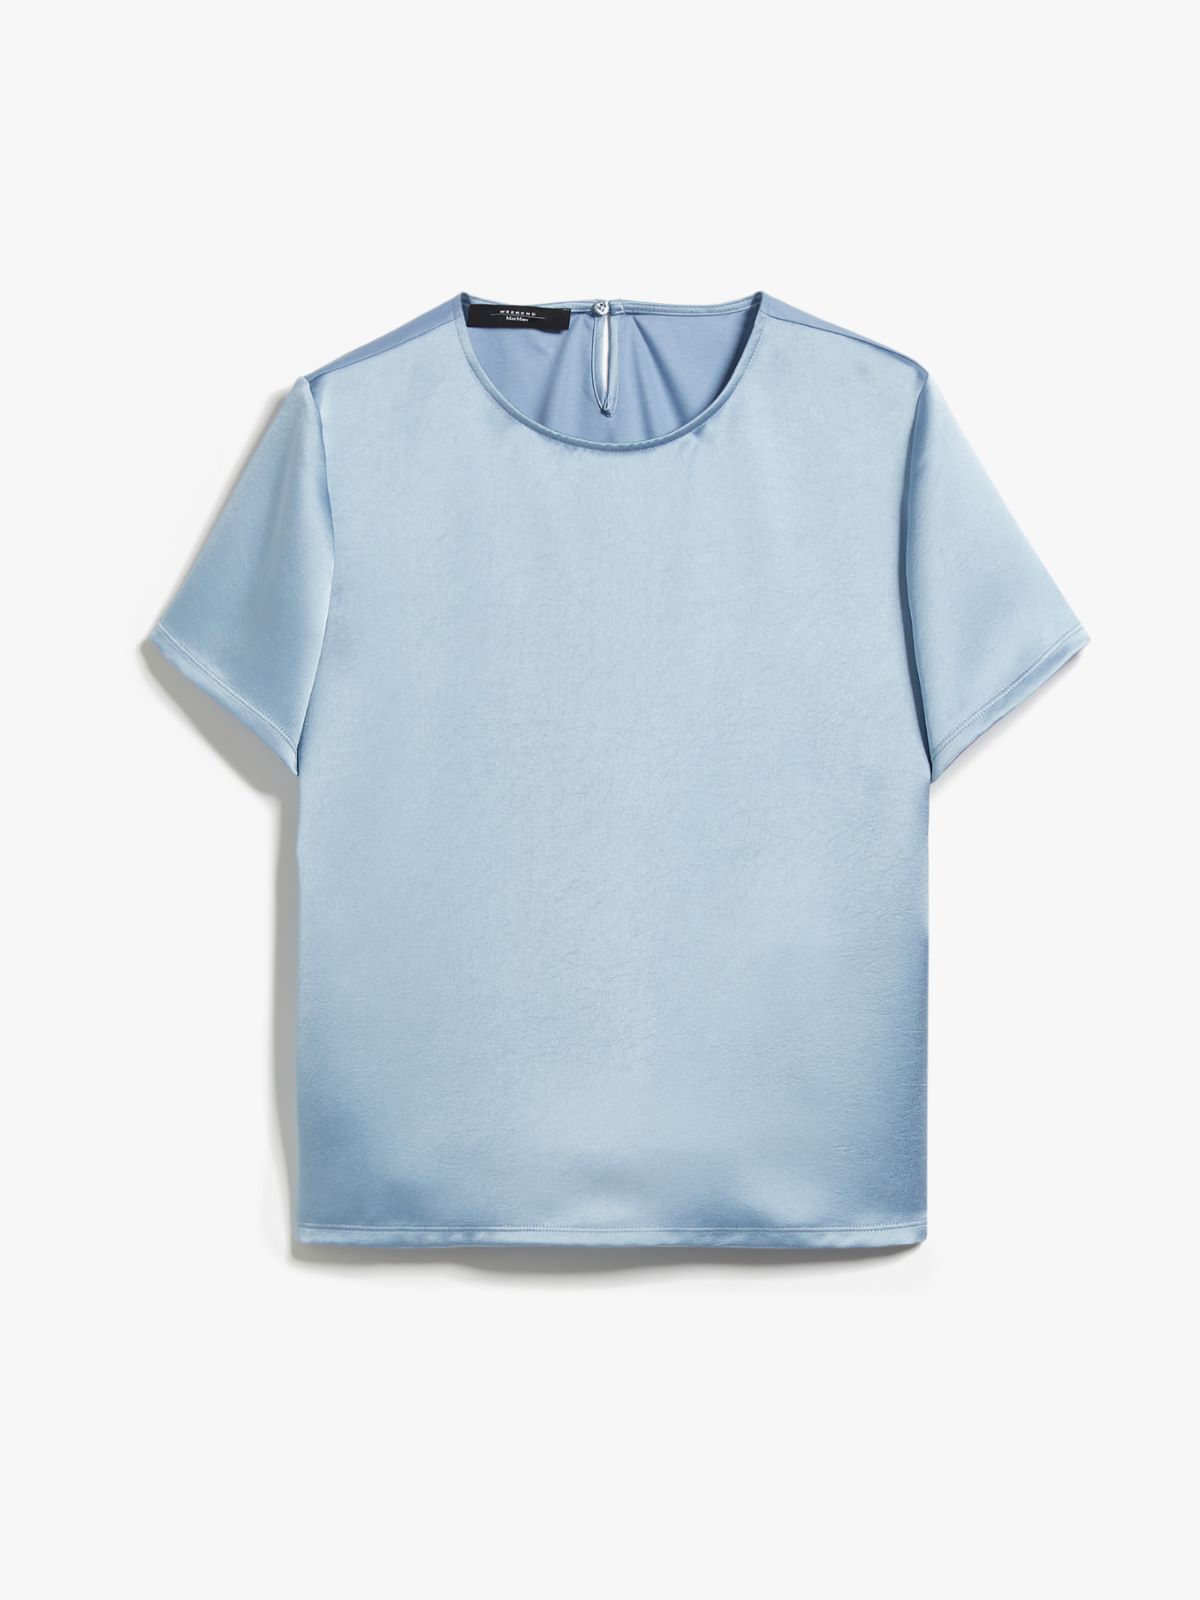 Blouse in satin and jersey - LIGHT BLUE - Weekend Max Mara - 6